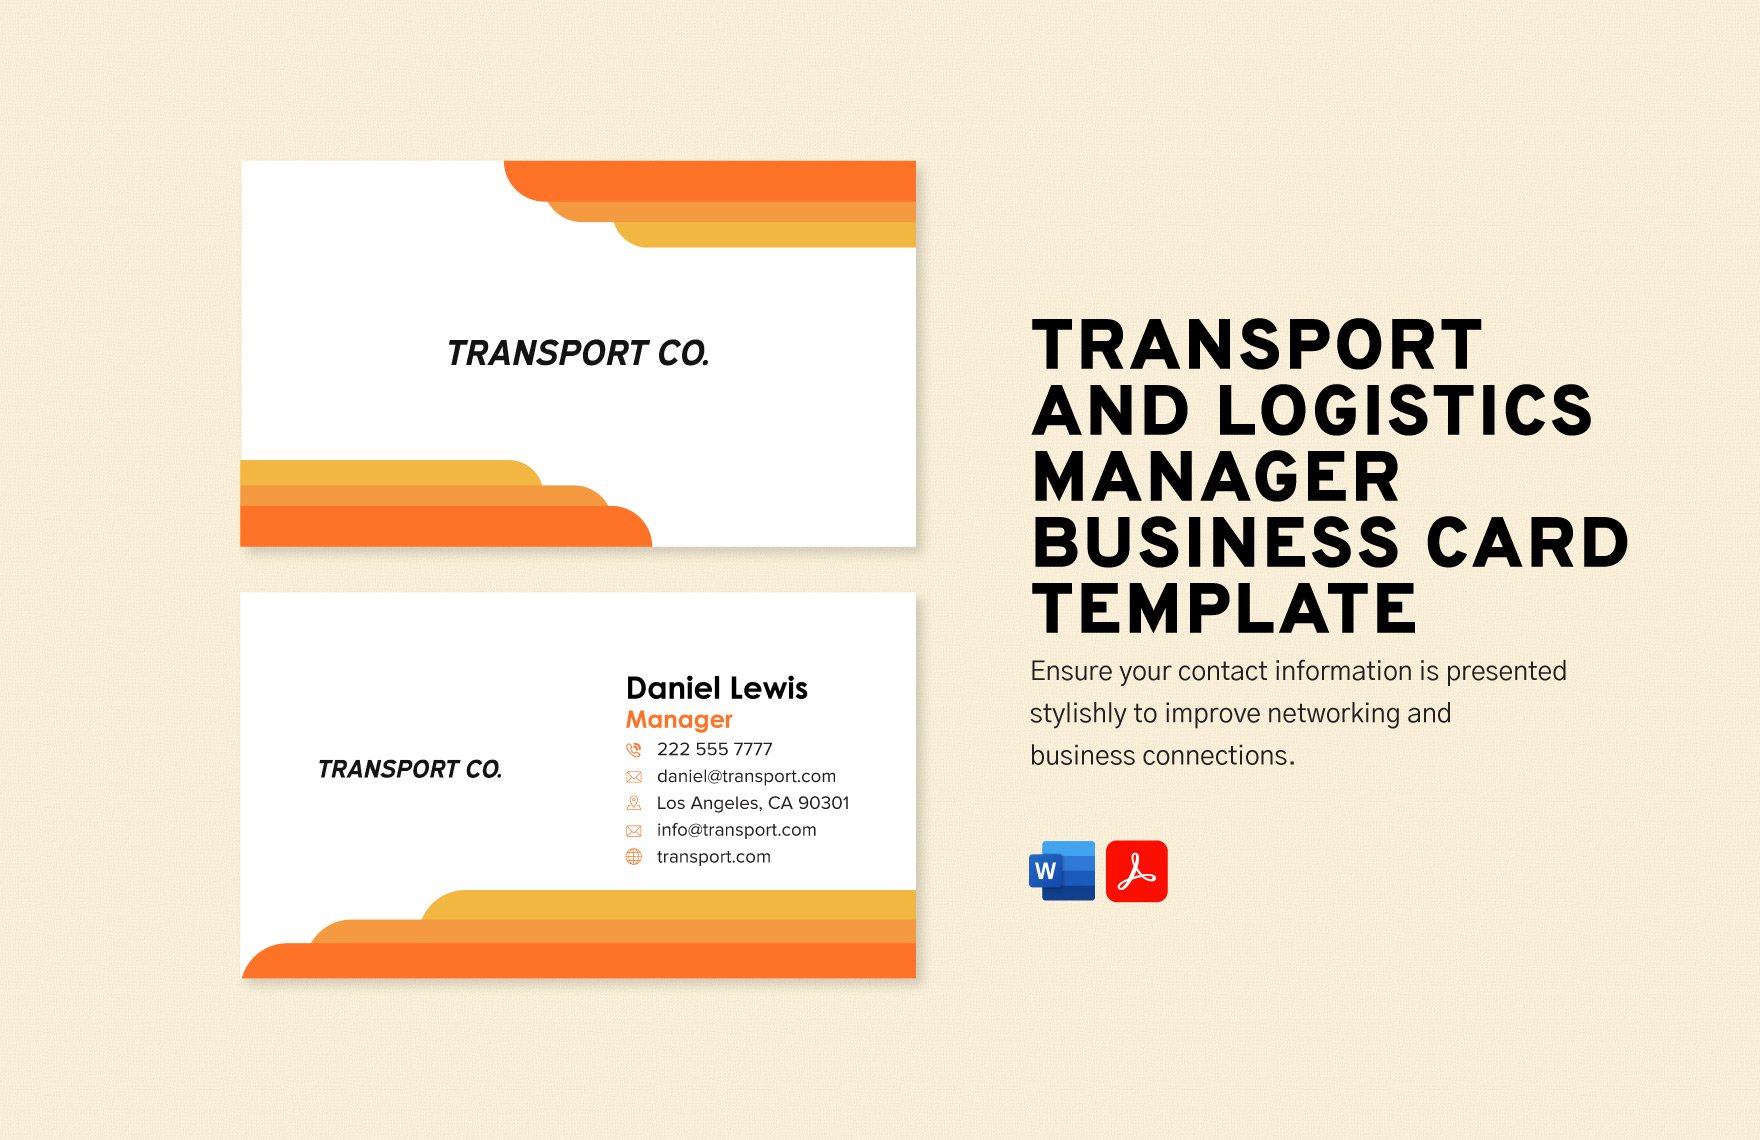 Transport and Logistics Manager Business Card Template in Word, PDF